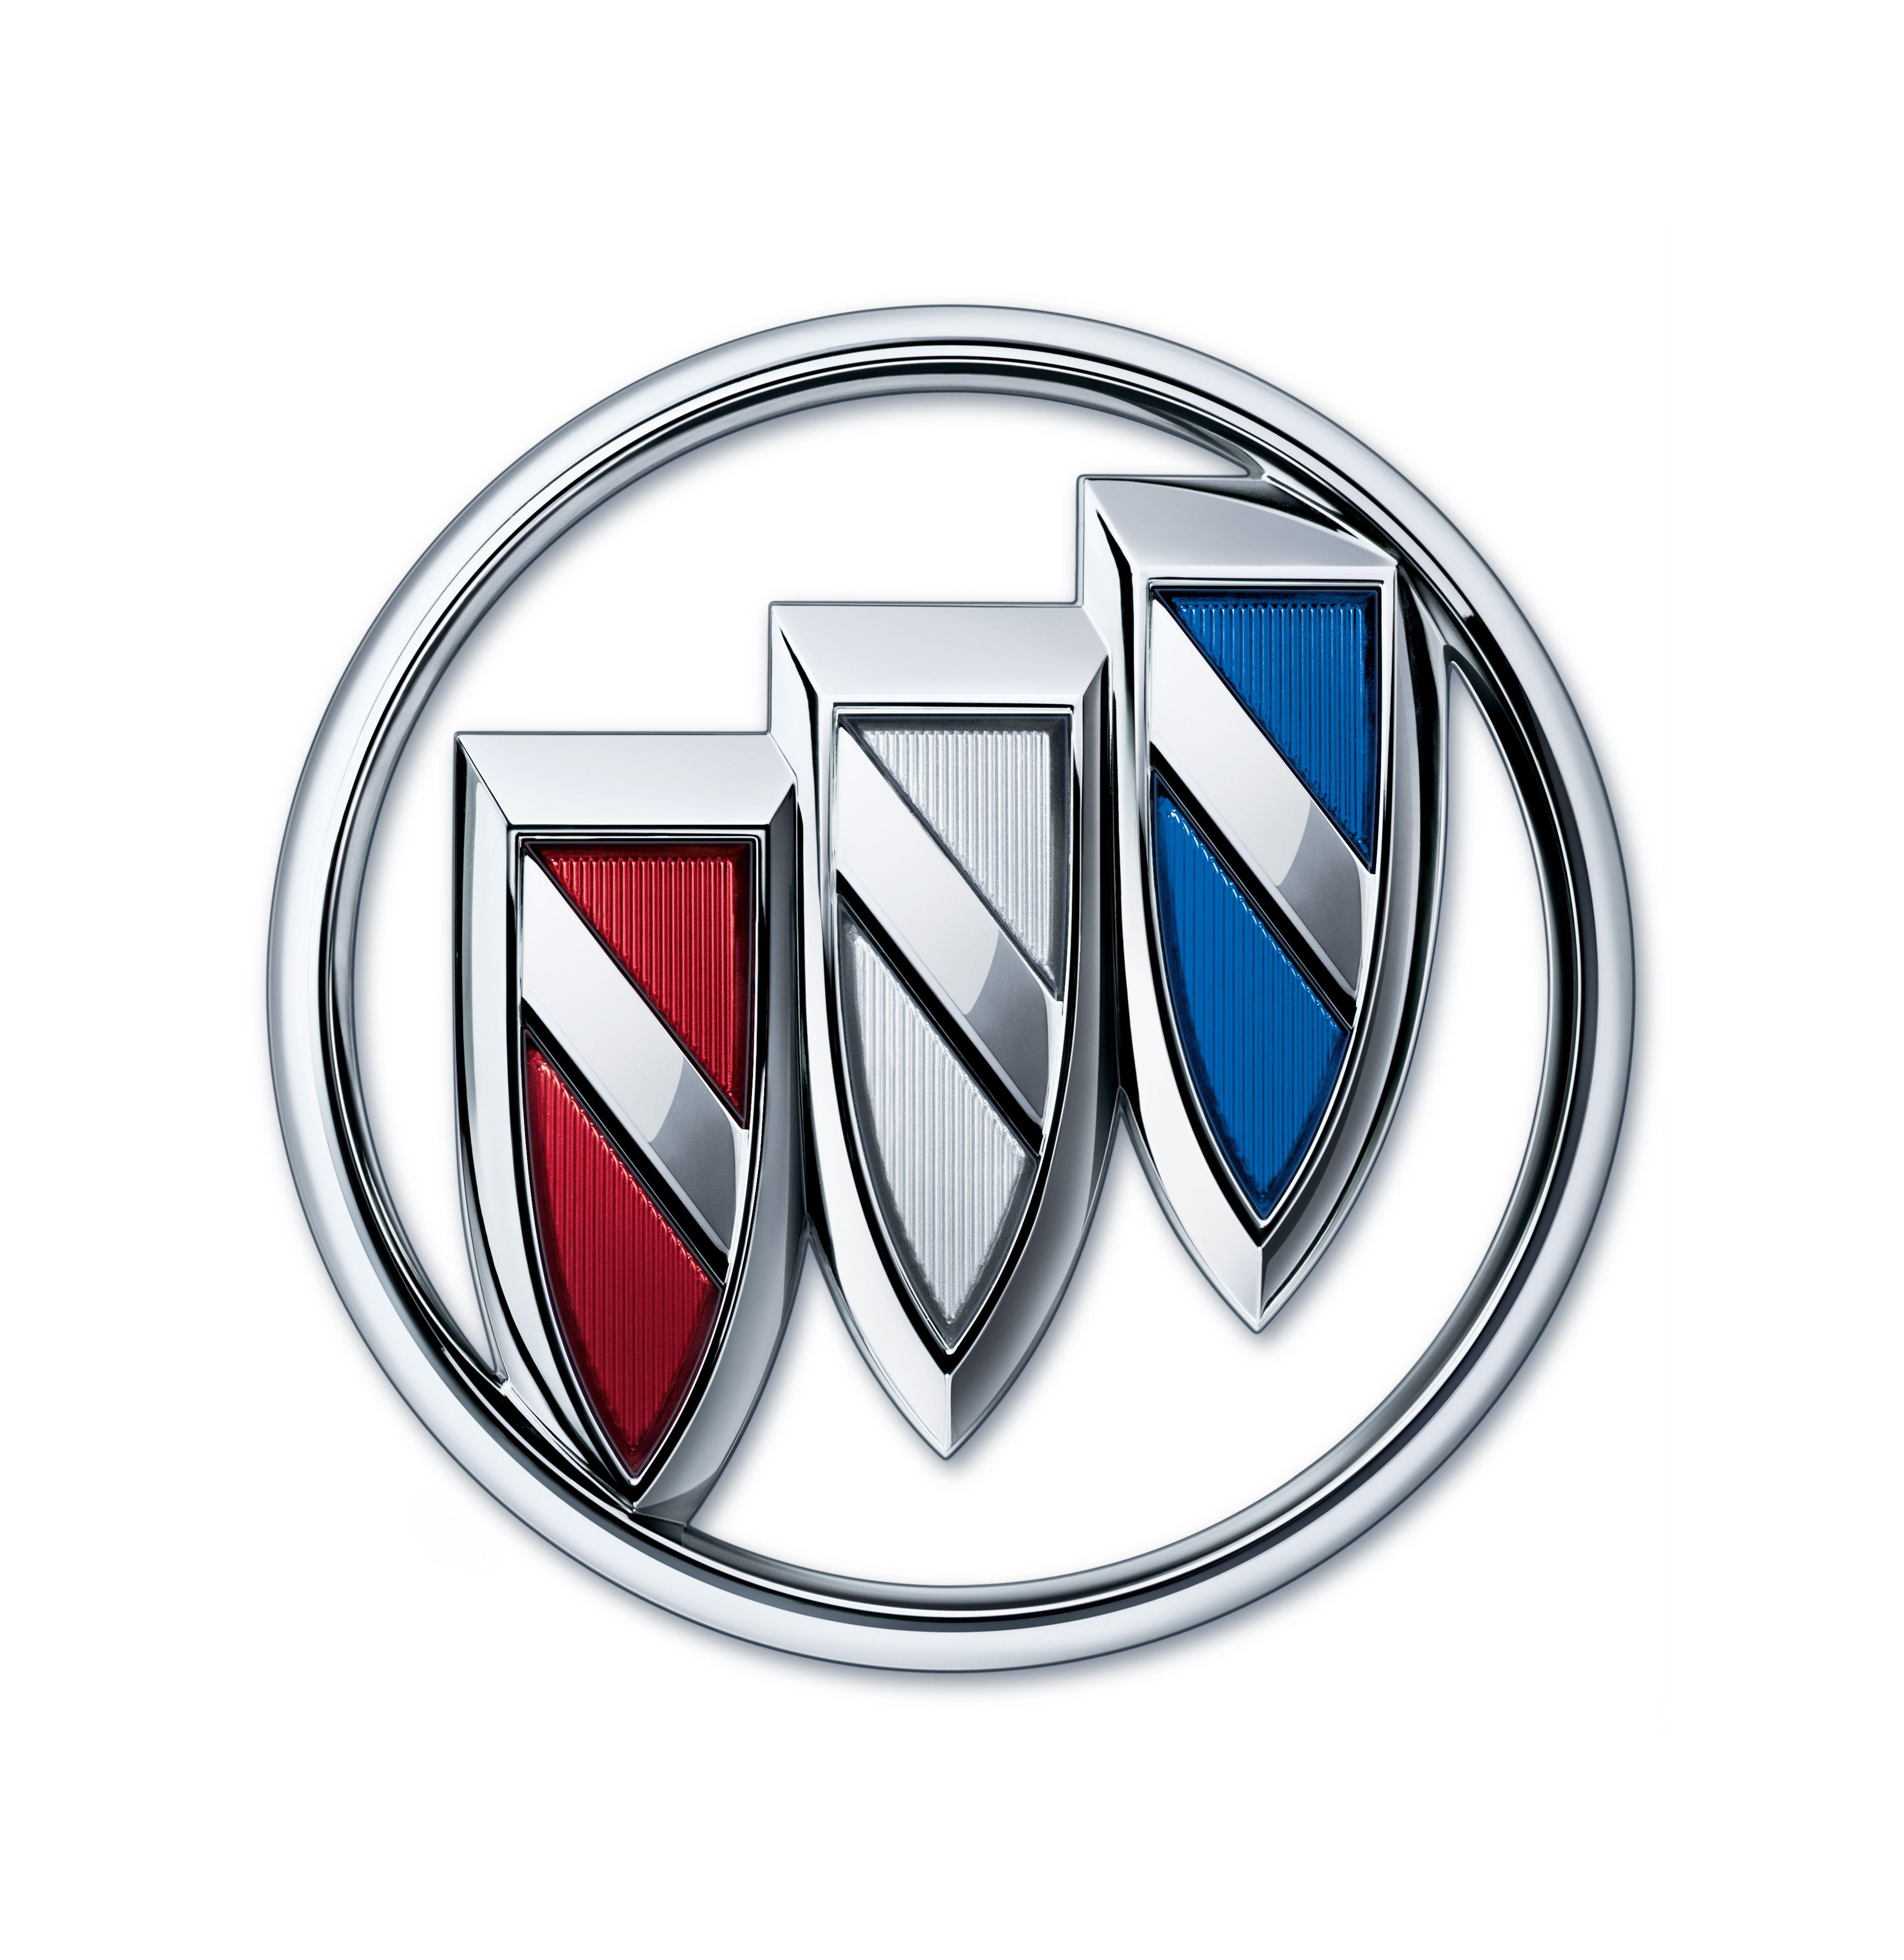 Buick Logo - Revised Tri-Shield Insignia Introduces New Face of Buick